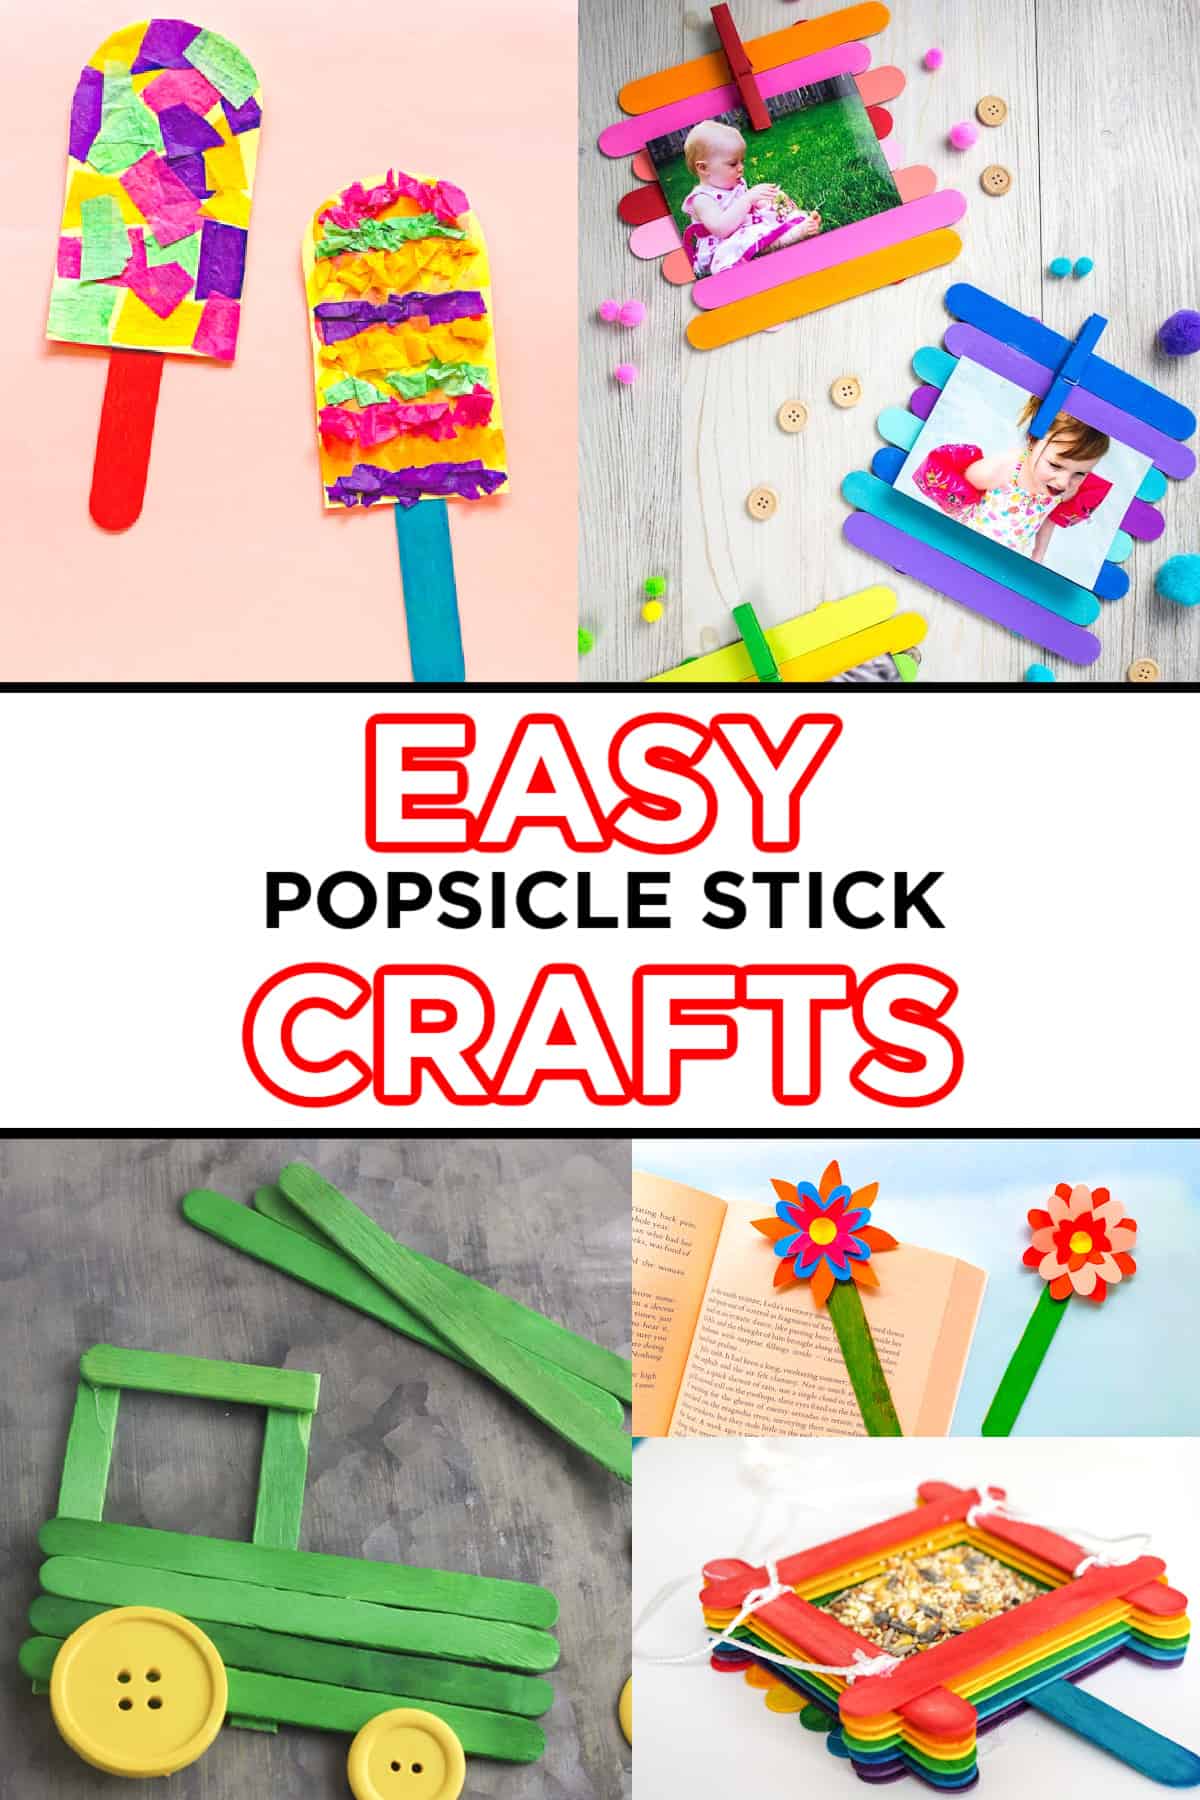 30 Easy Popsicle Stick Crafts for All Ages - Suite 101